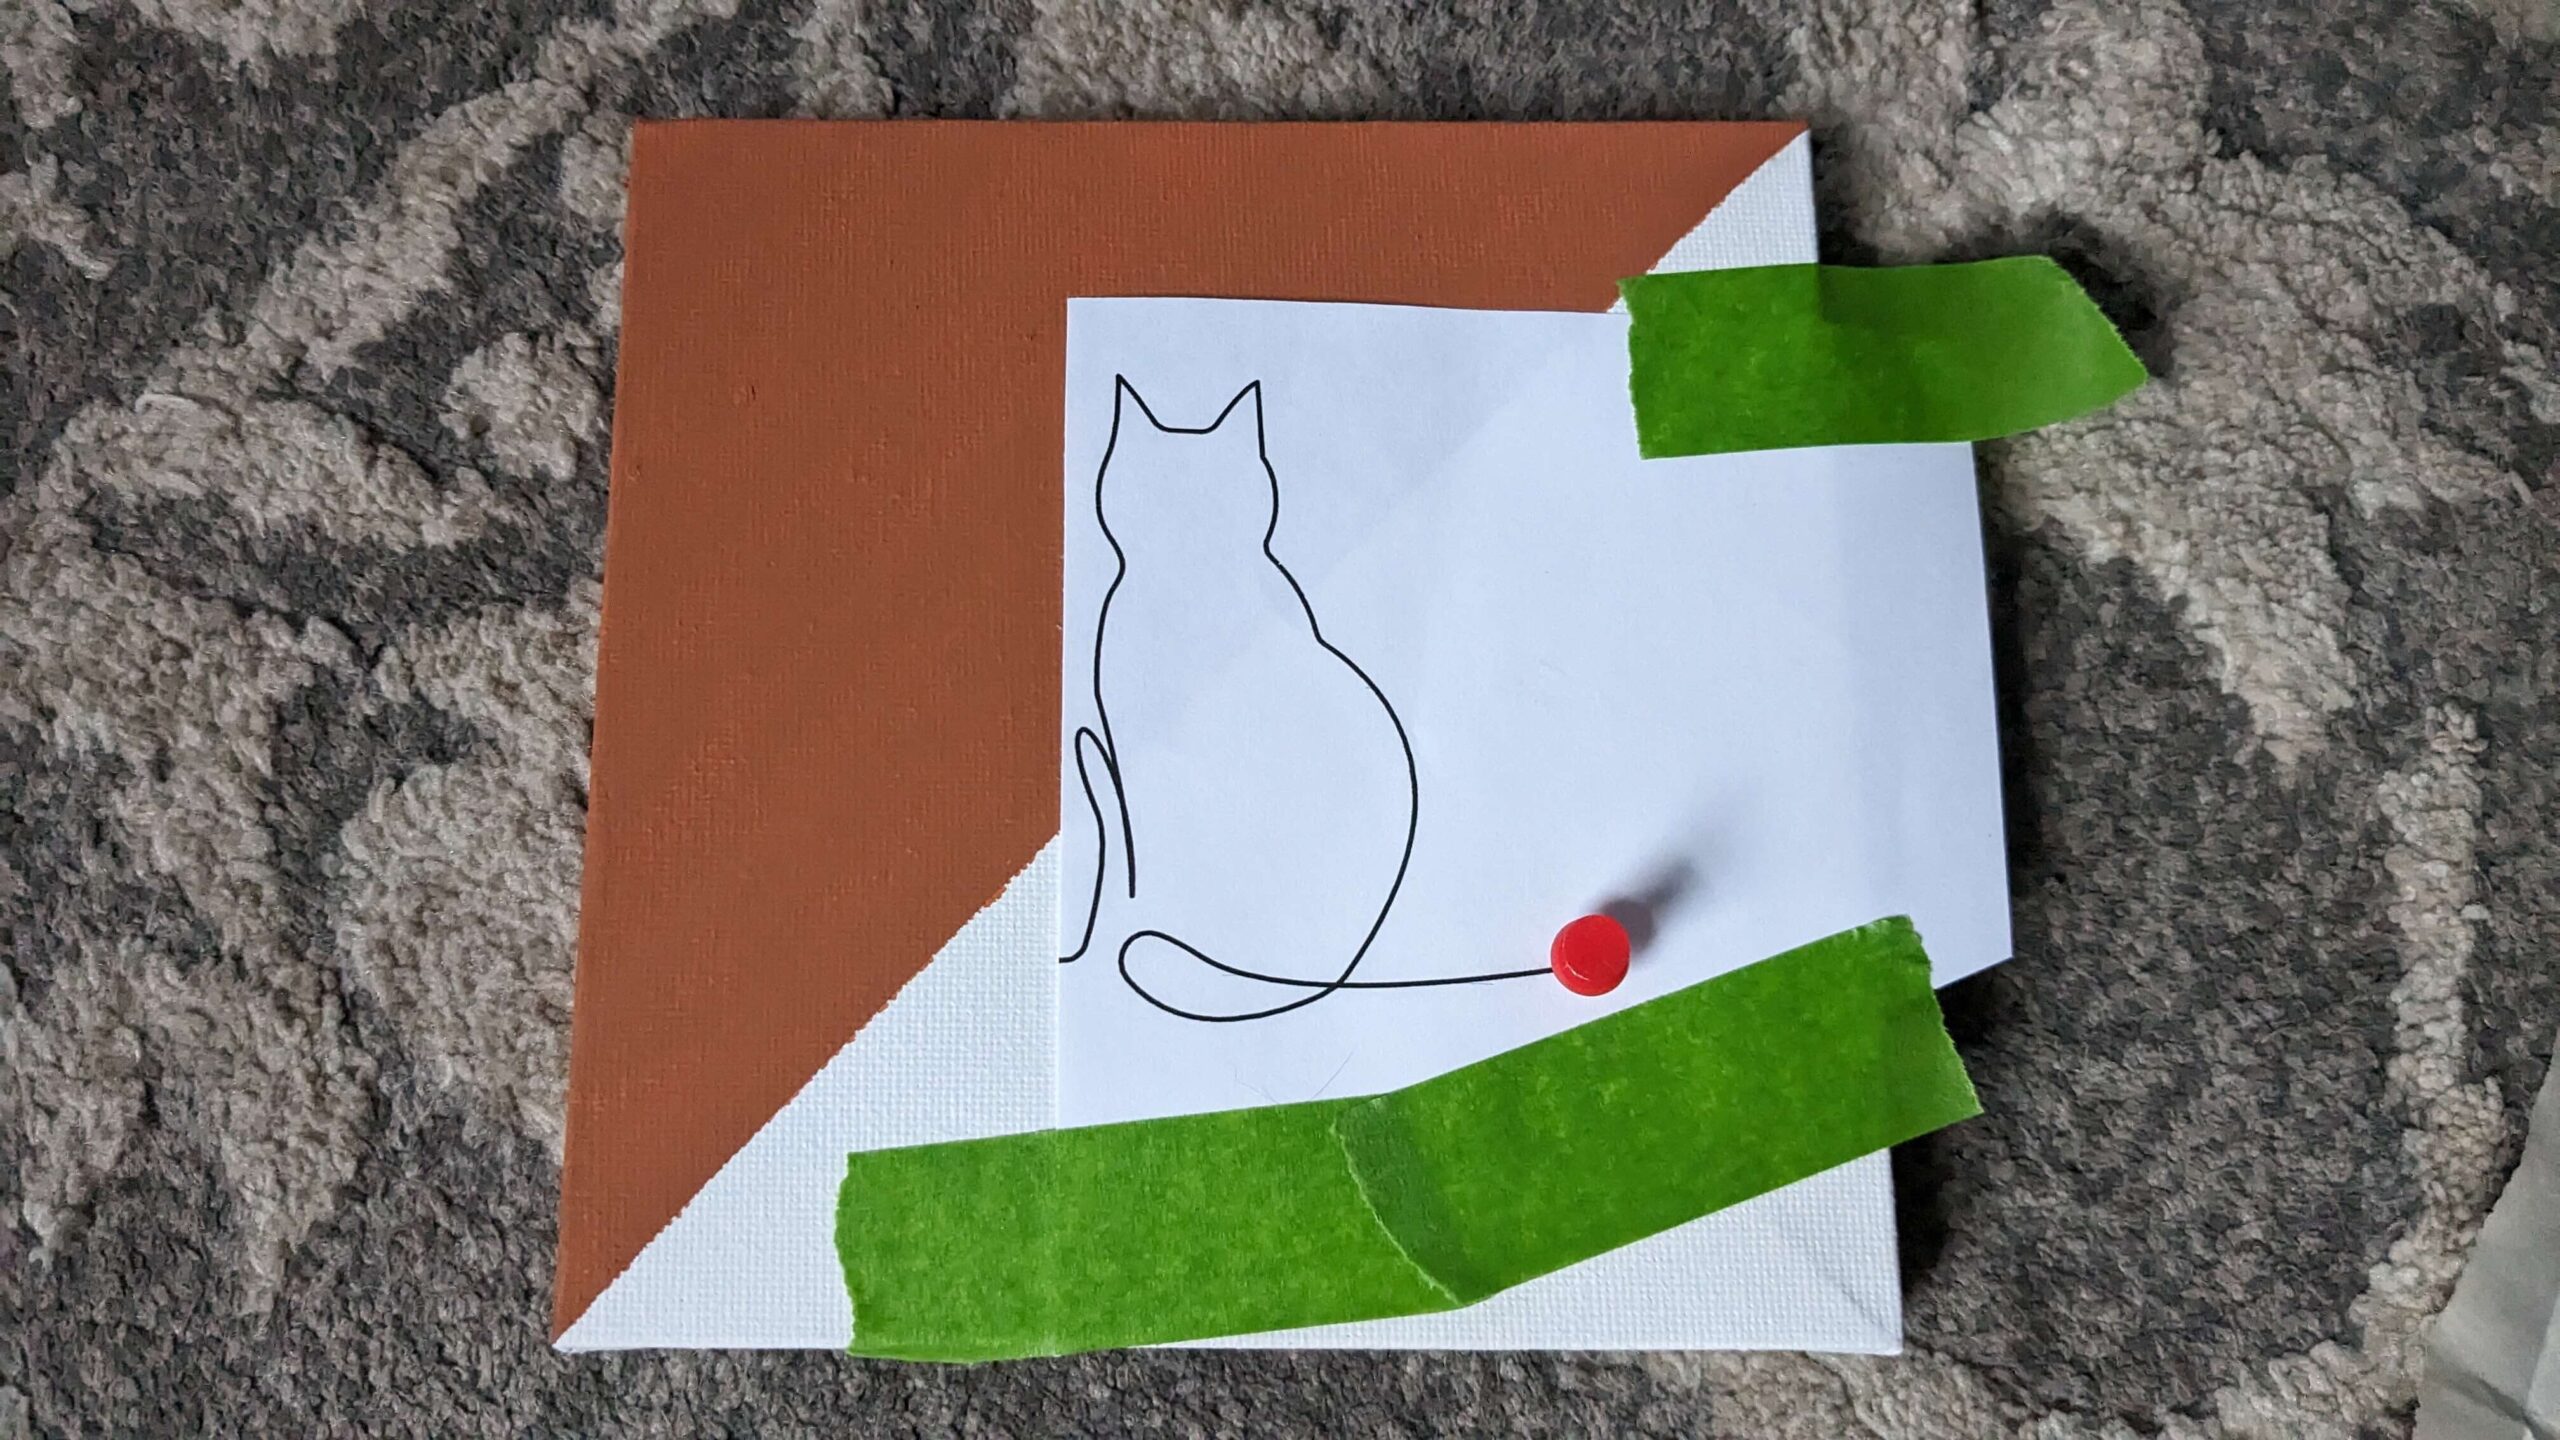 Orange and white square canvas with a cat line art picture taped to it with green painters tape and a red thumbtack